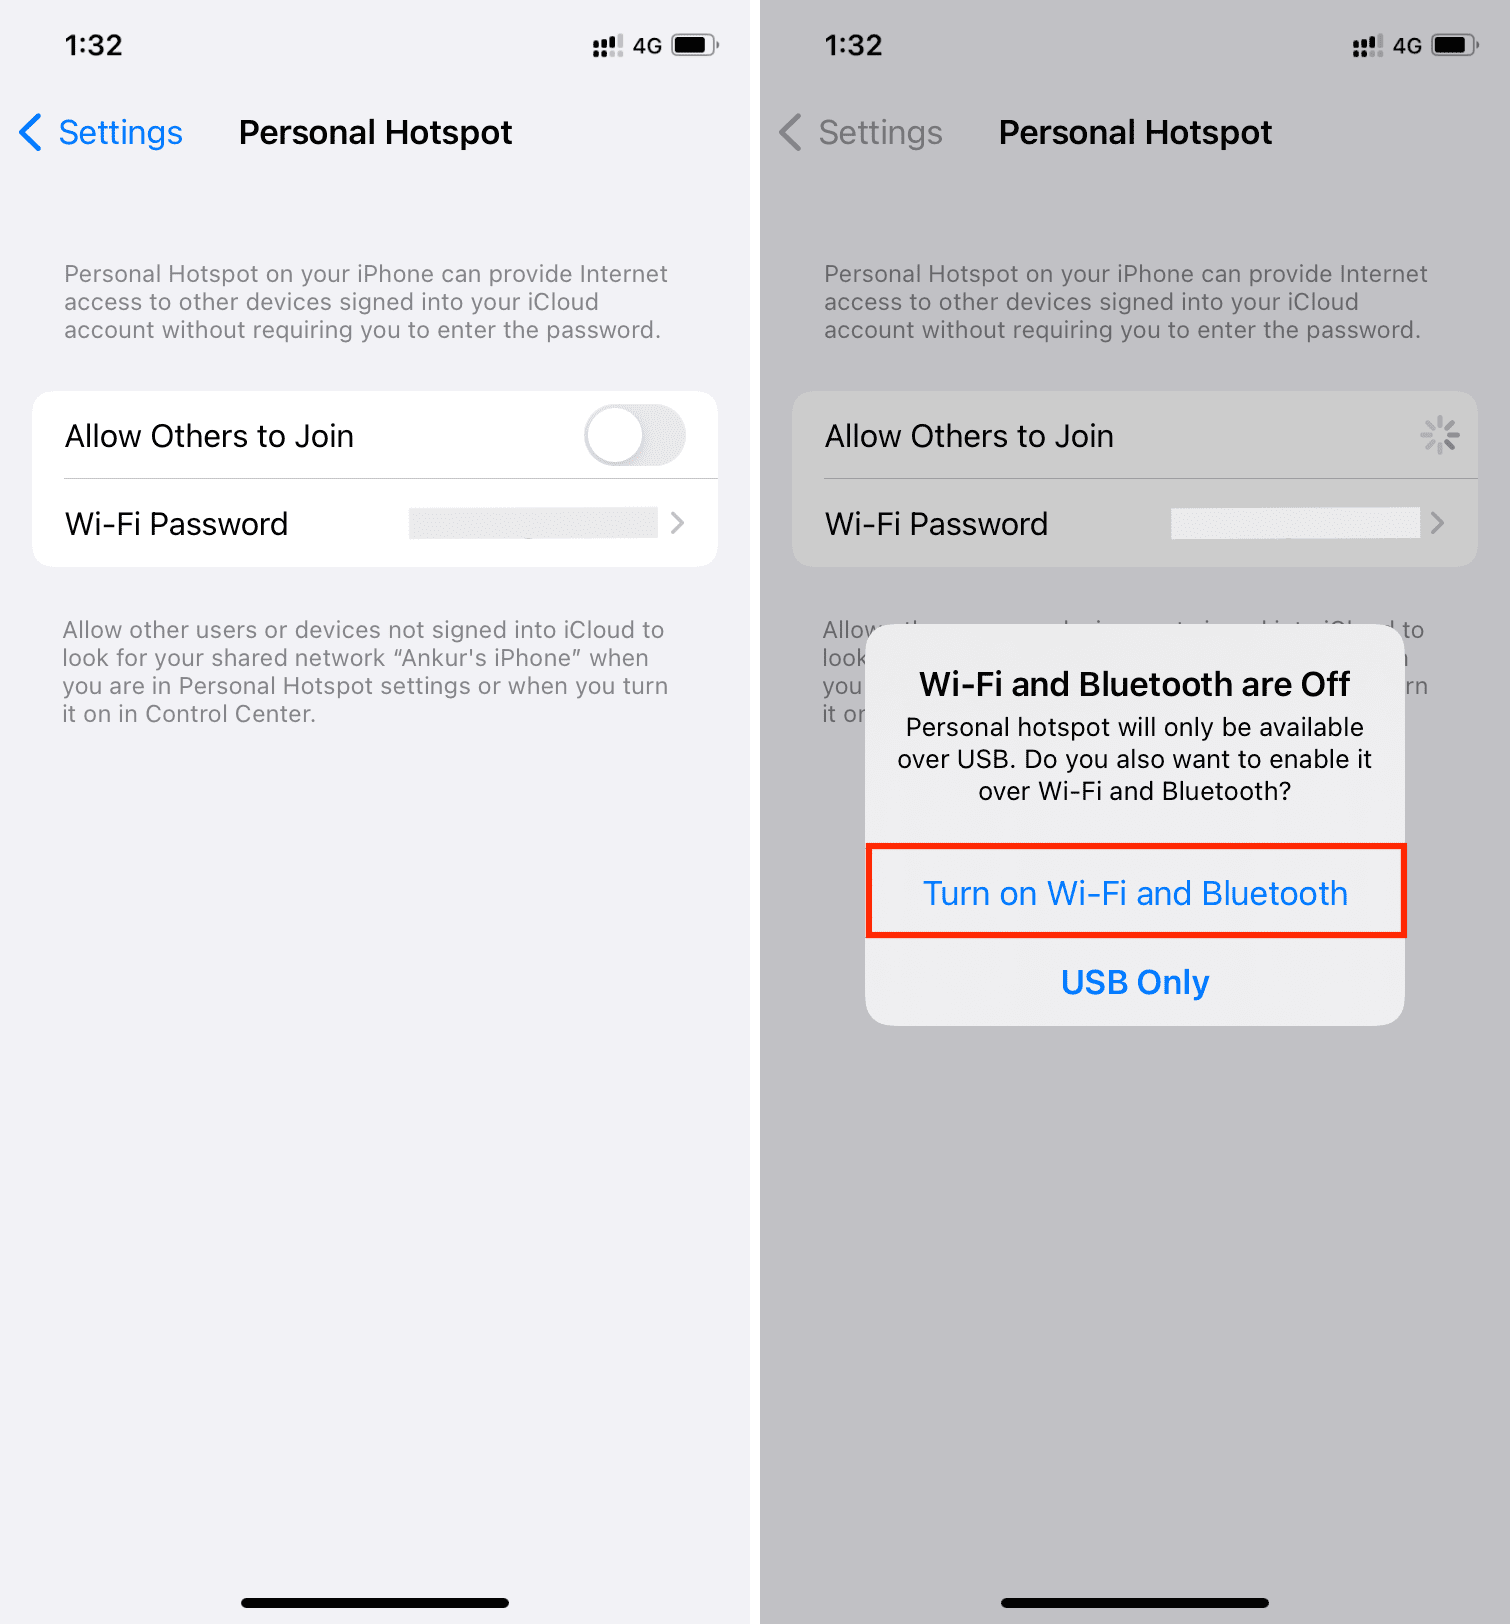 Turn on Wi-Fi and Bluetooth via Personal Hotspot settings on iPhone